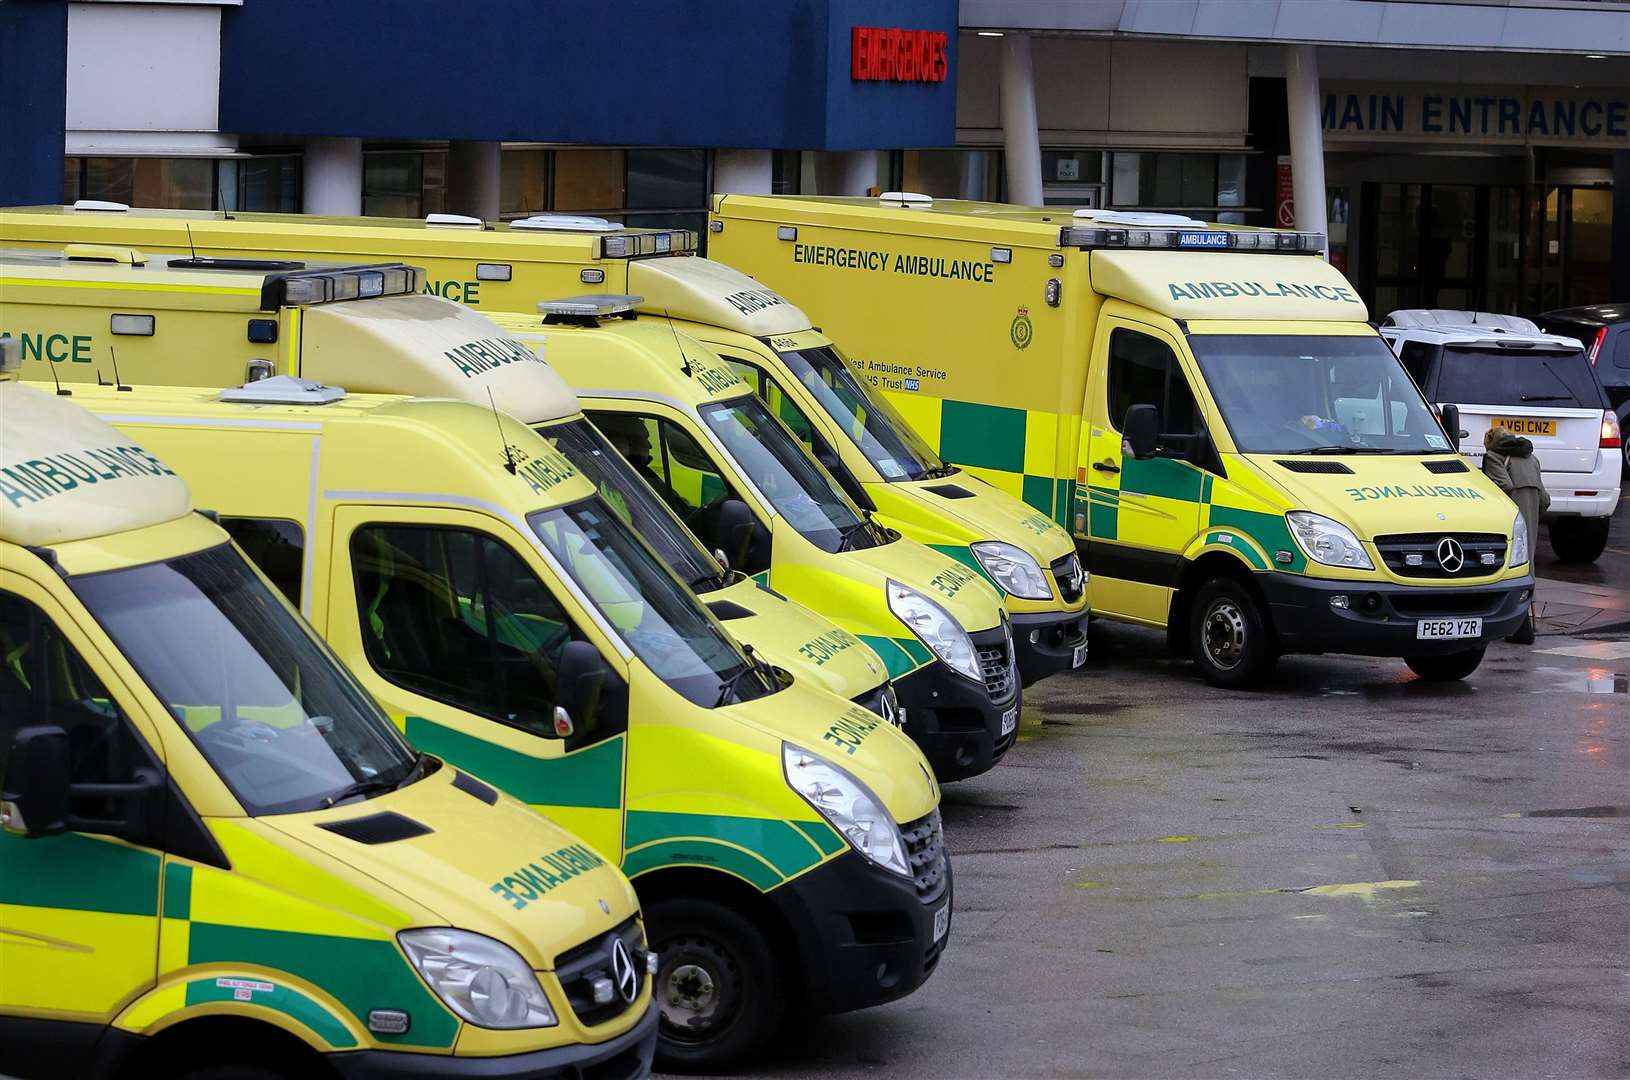 Average ambulance response times have been high in recent months